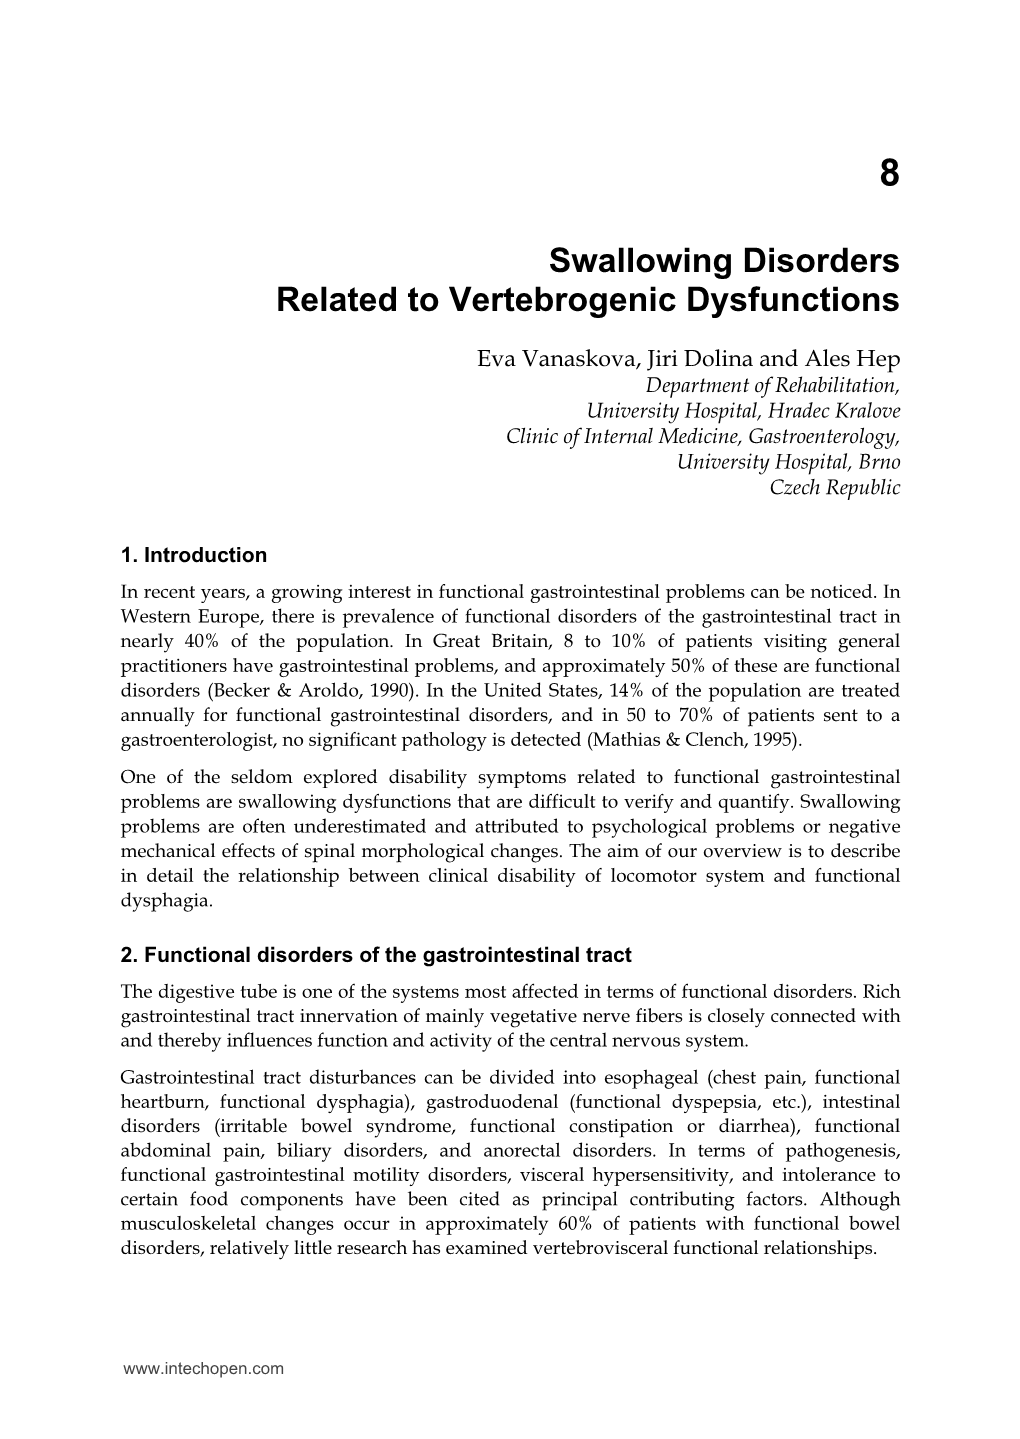 Swallowing Disorders Related to Vertebrogenic Dysfunctions